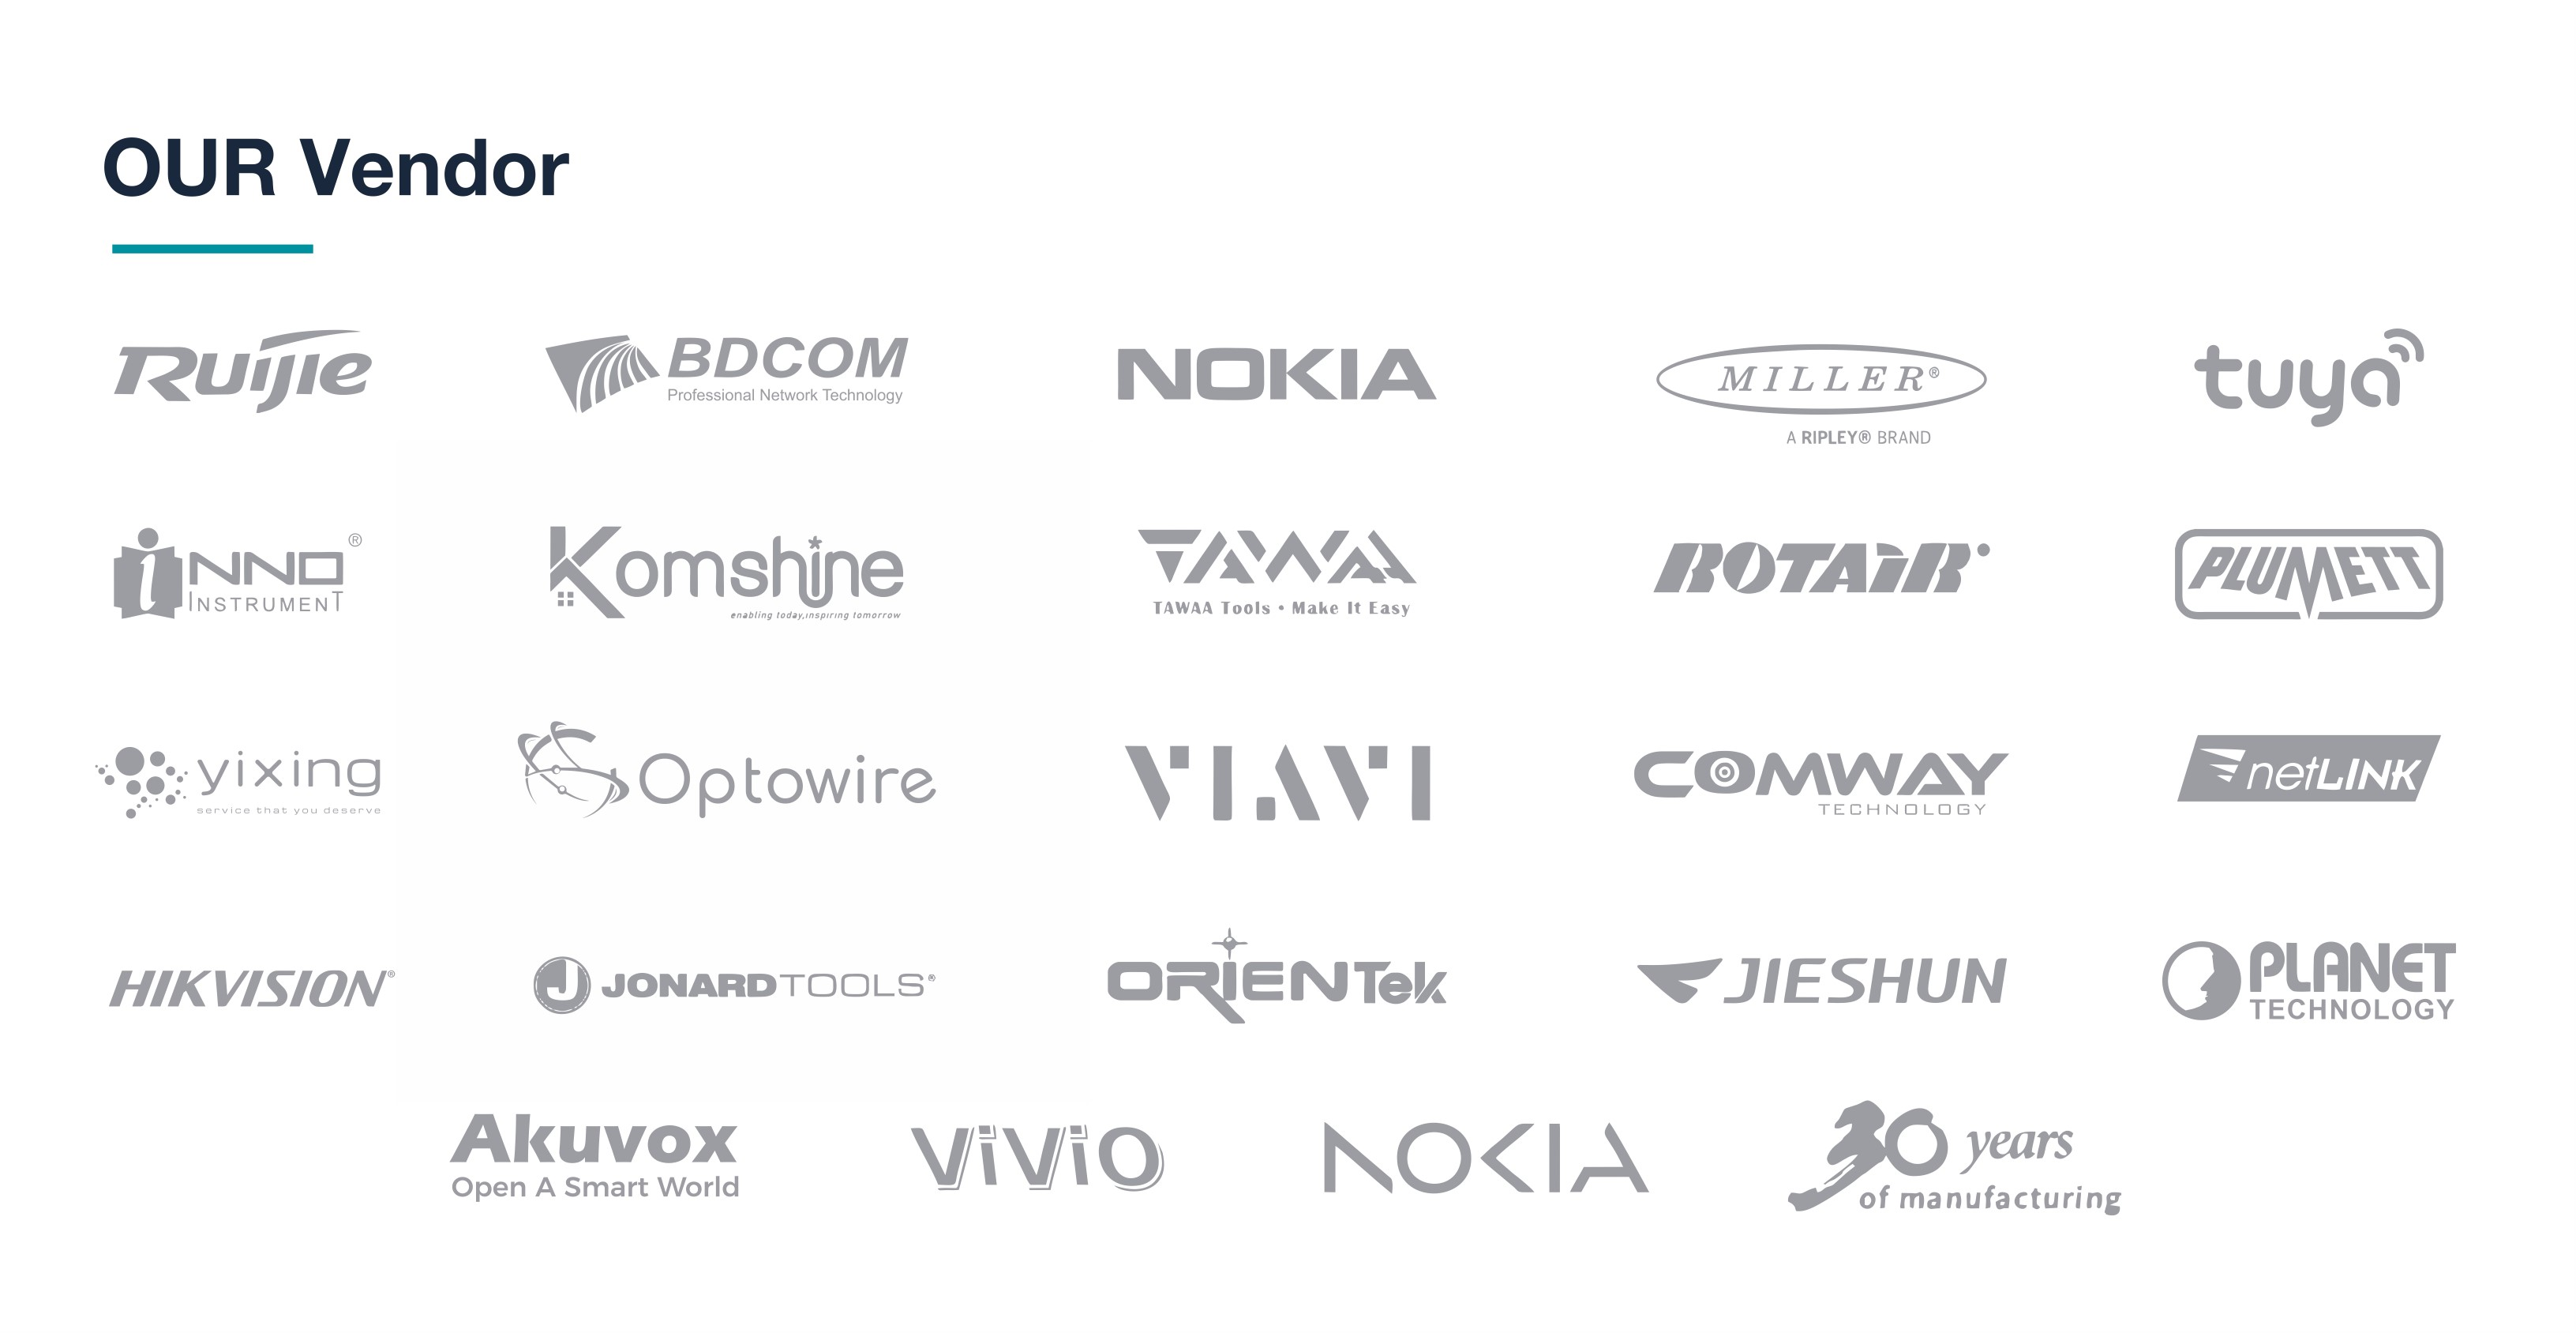 A group of logos on a white background

Description automatically generated